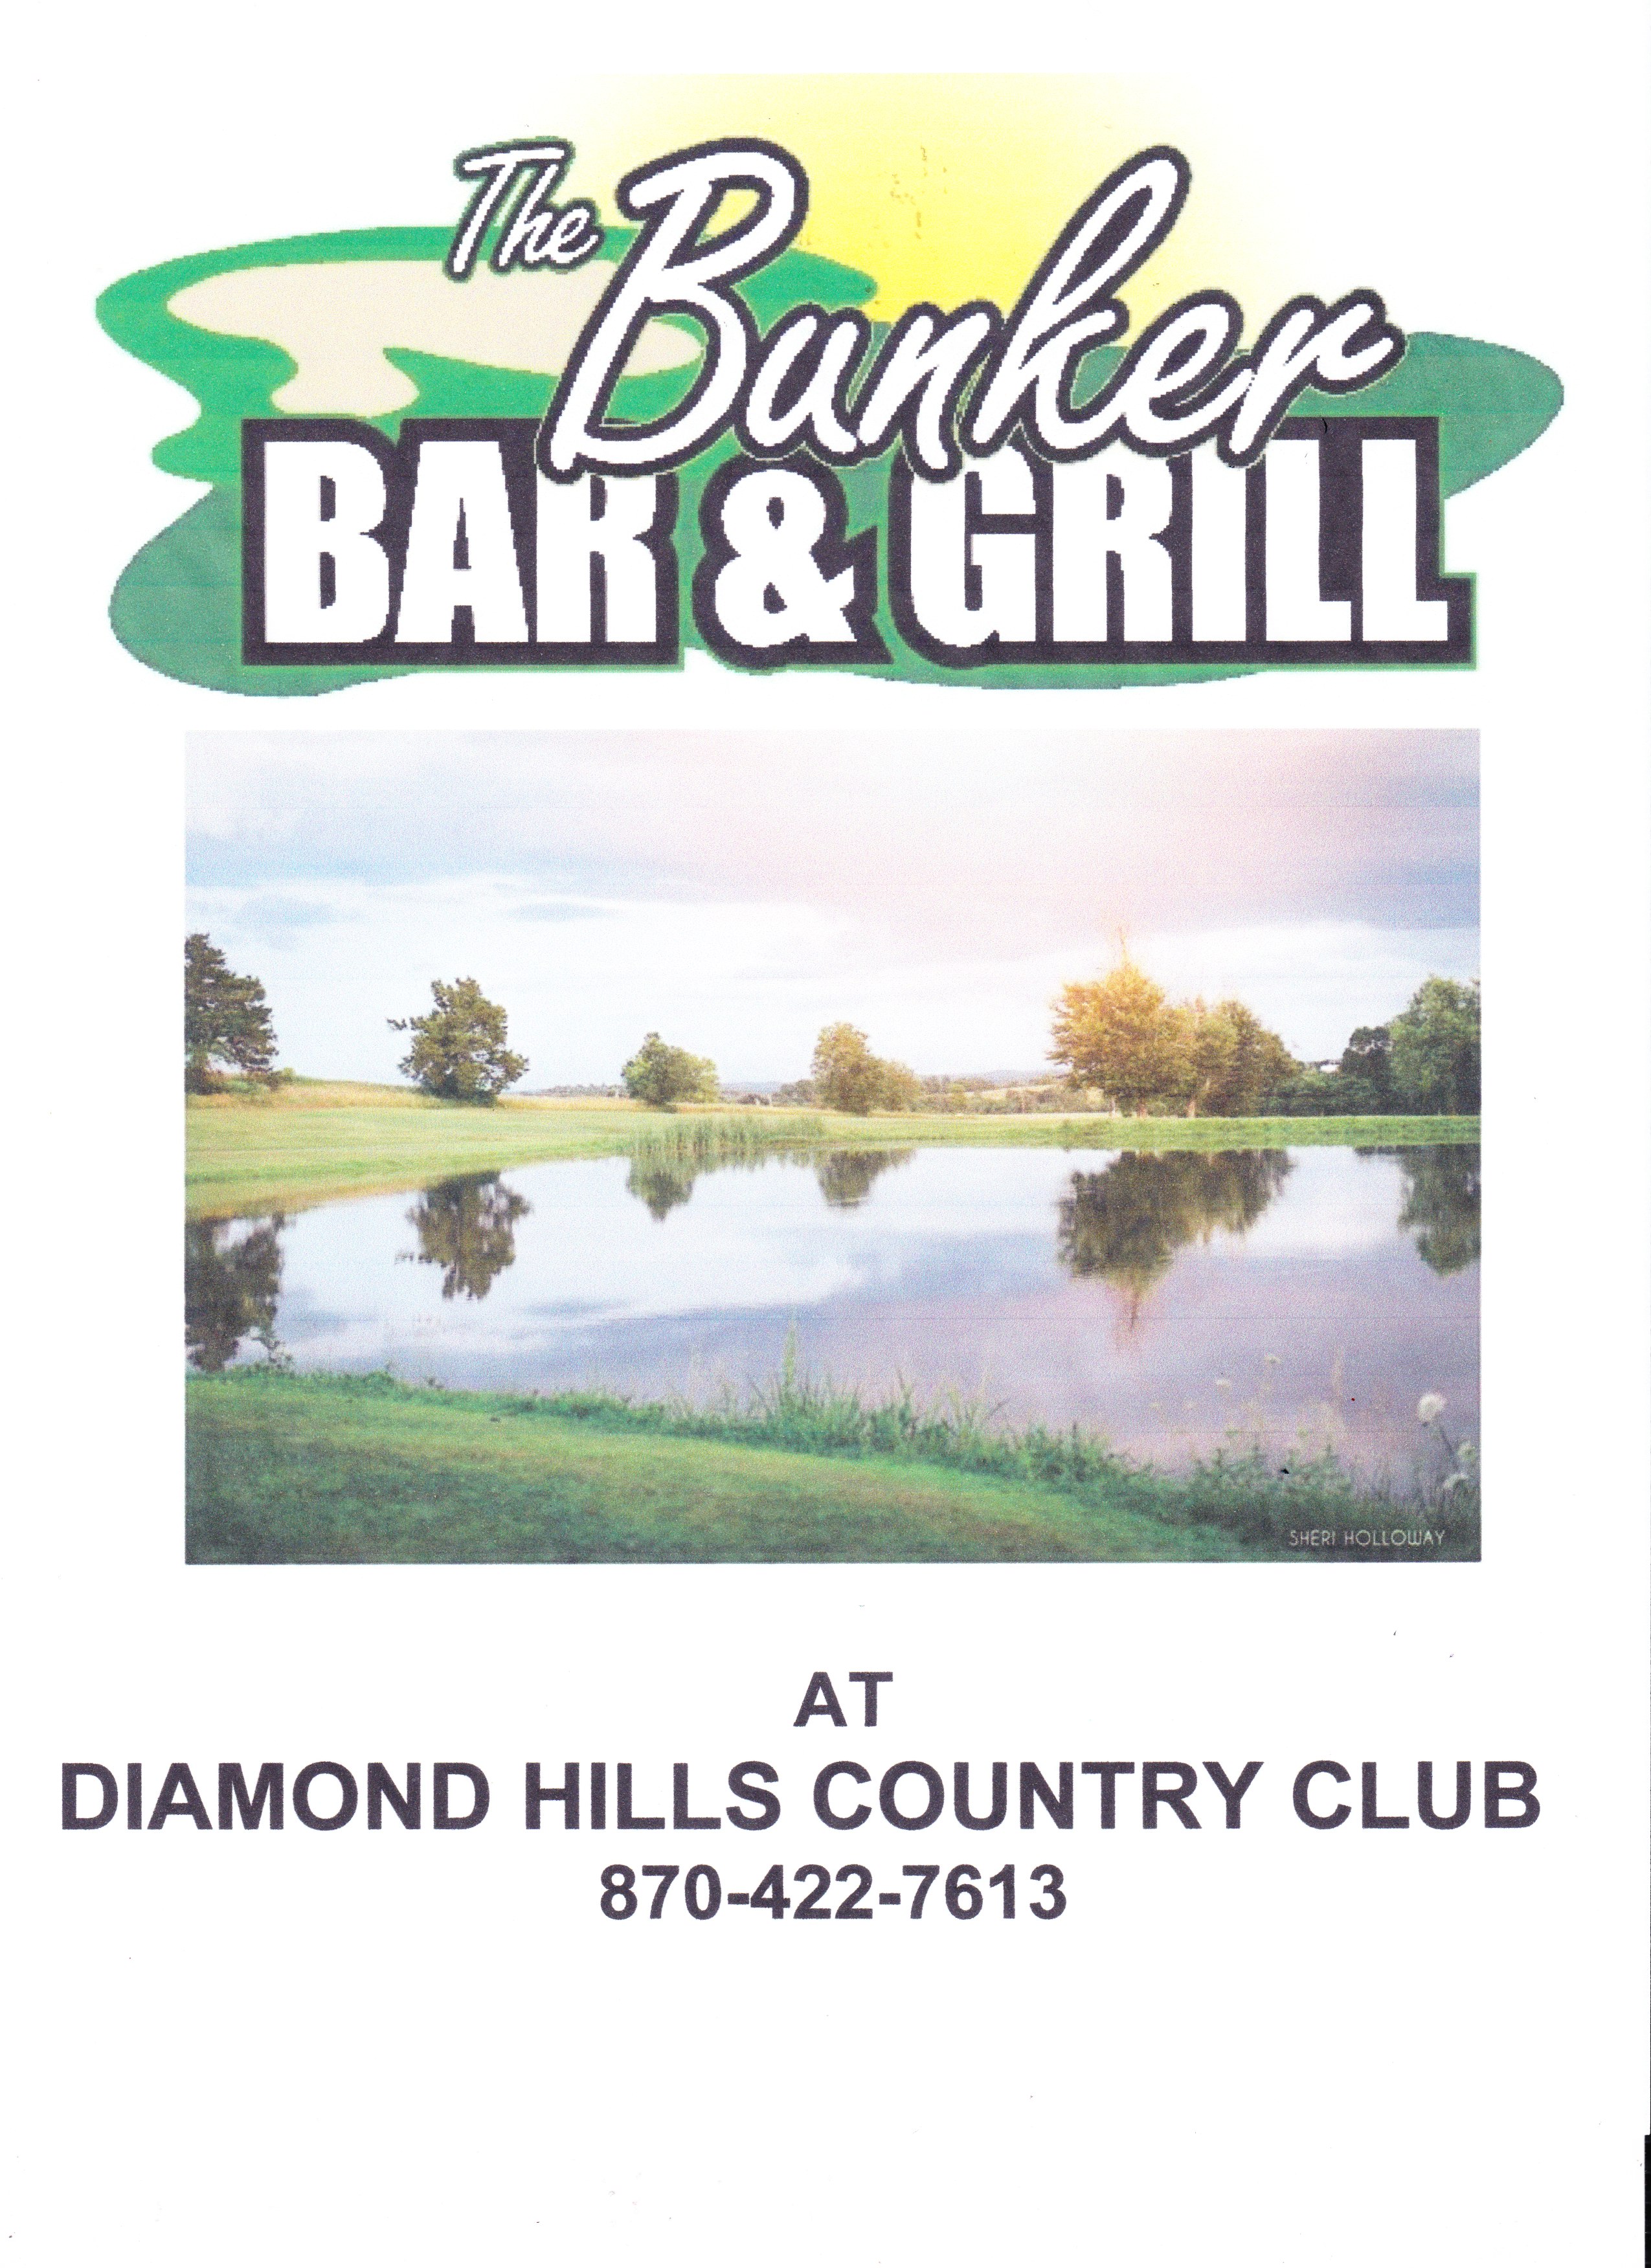 Diamond Hills Country Club & Bunker Grill